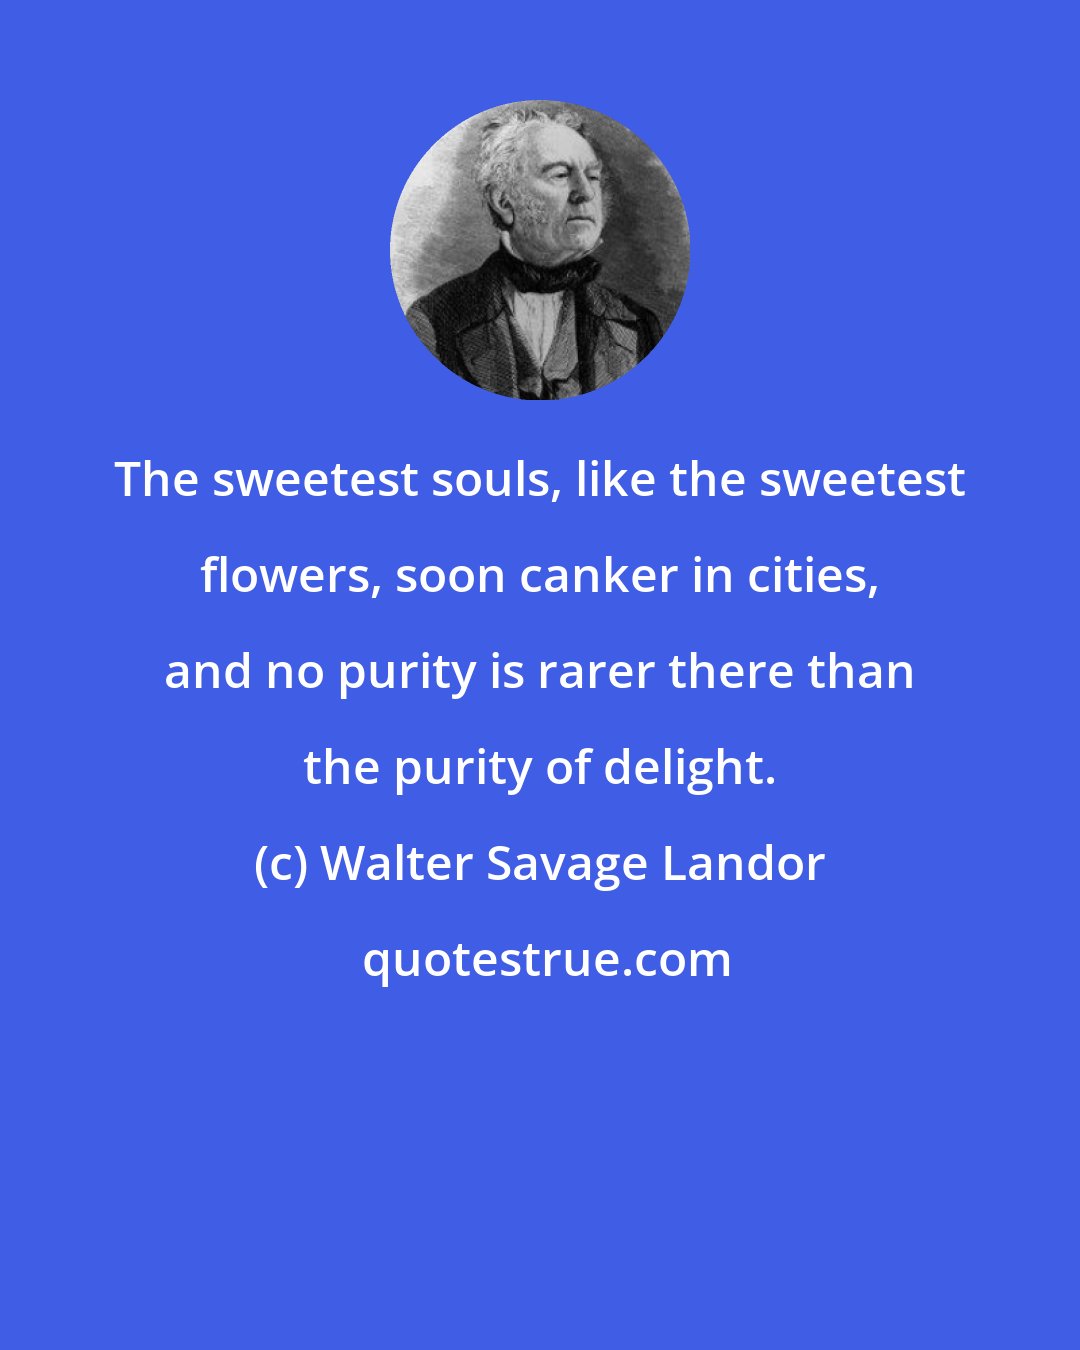 Walter Savage Landor: The sweetest souls, like the sweetest flowers, soon canker in cities, and no purity is rarer there than the purity of delight.